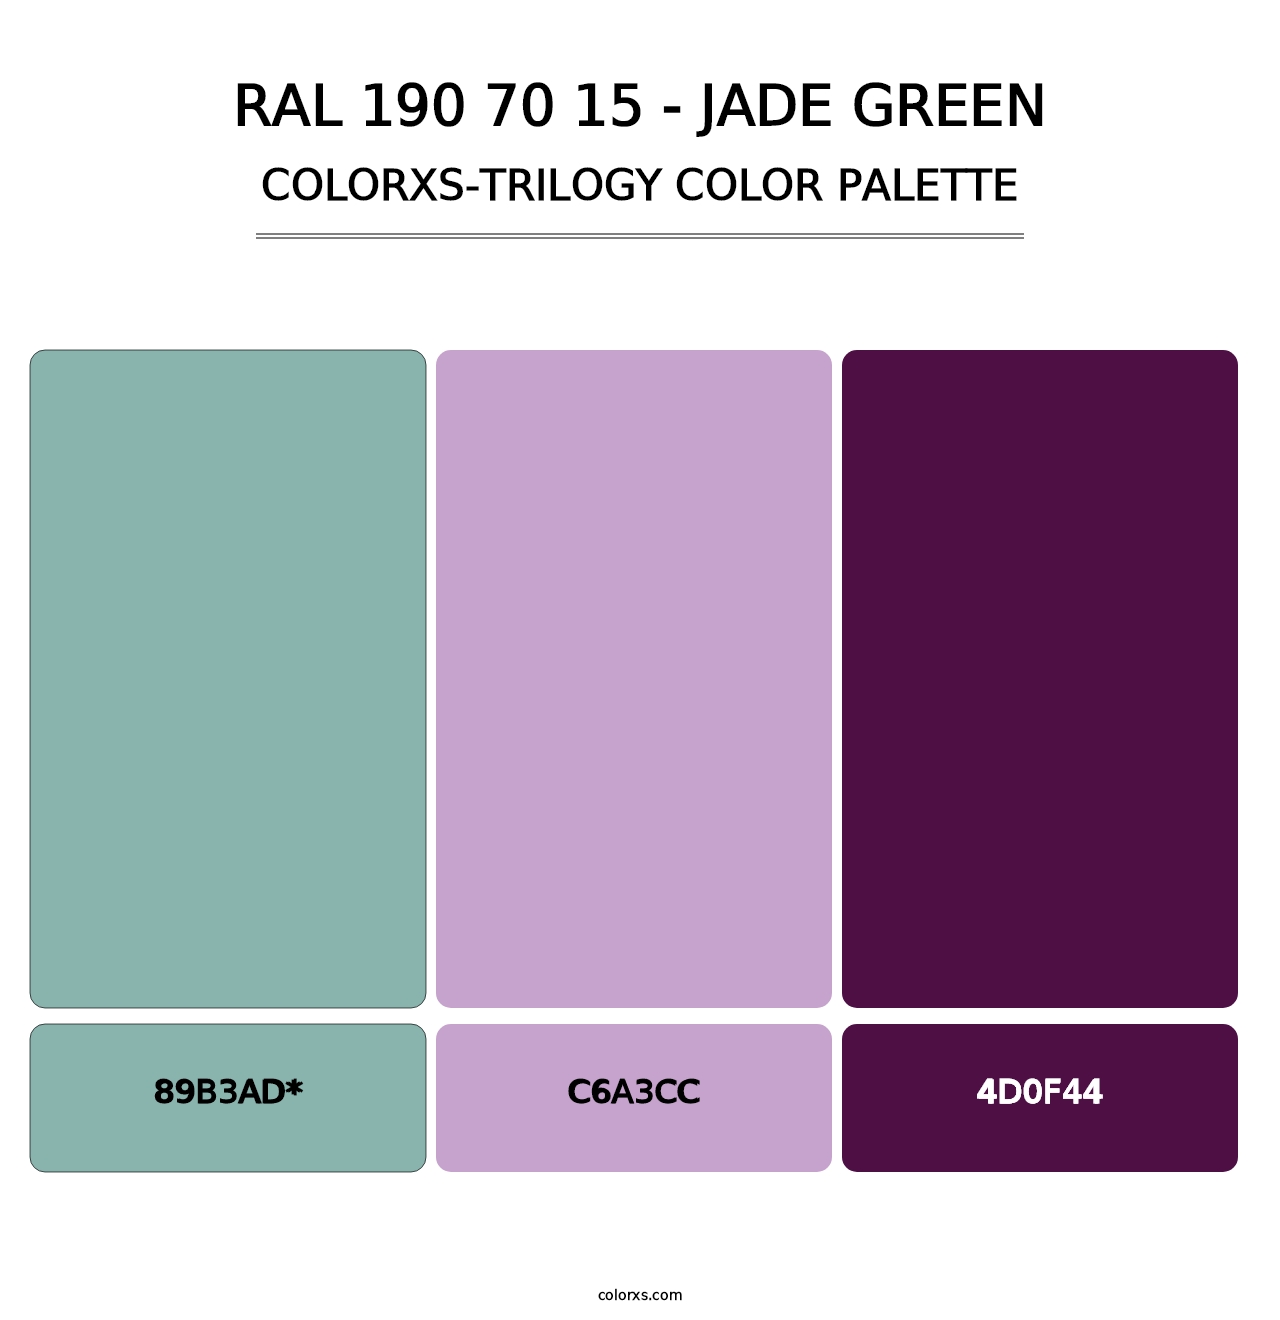 RAL 190 70 15 - Jade Green - Colorxs Trilogy Palette